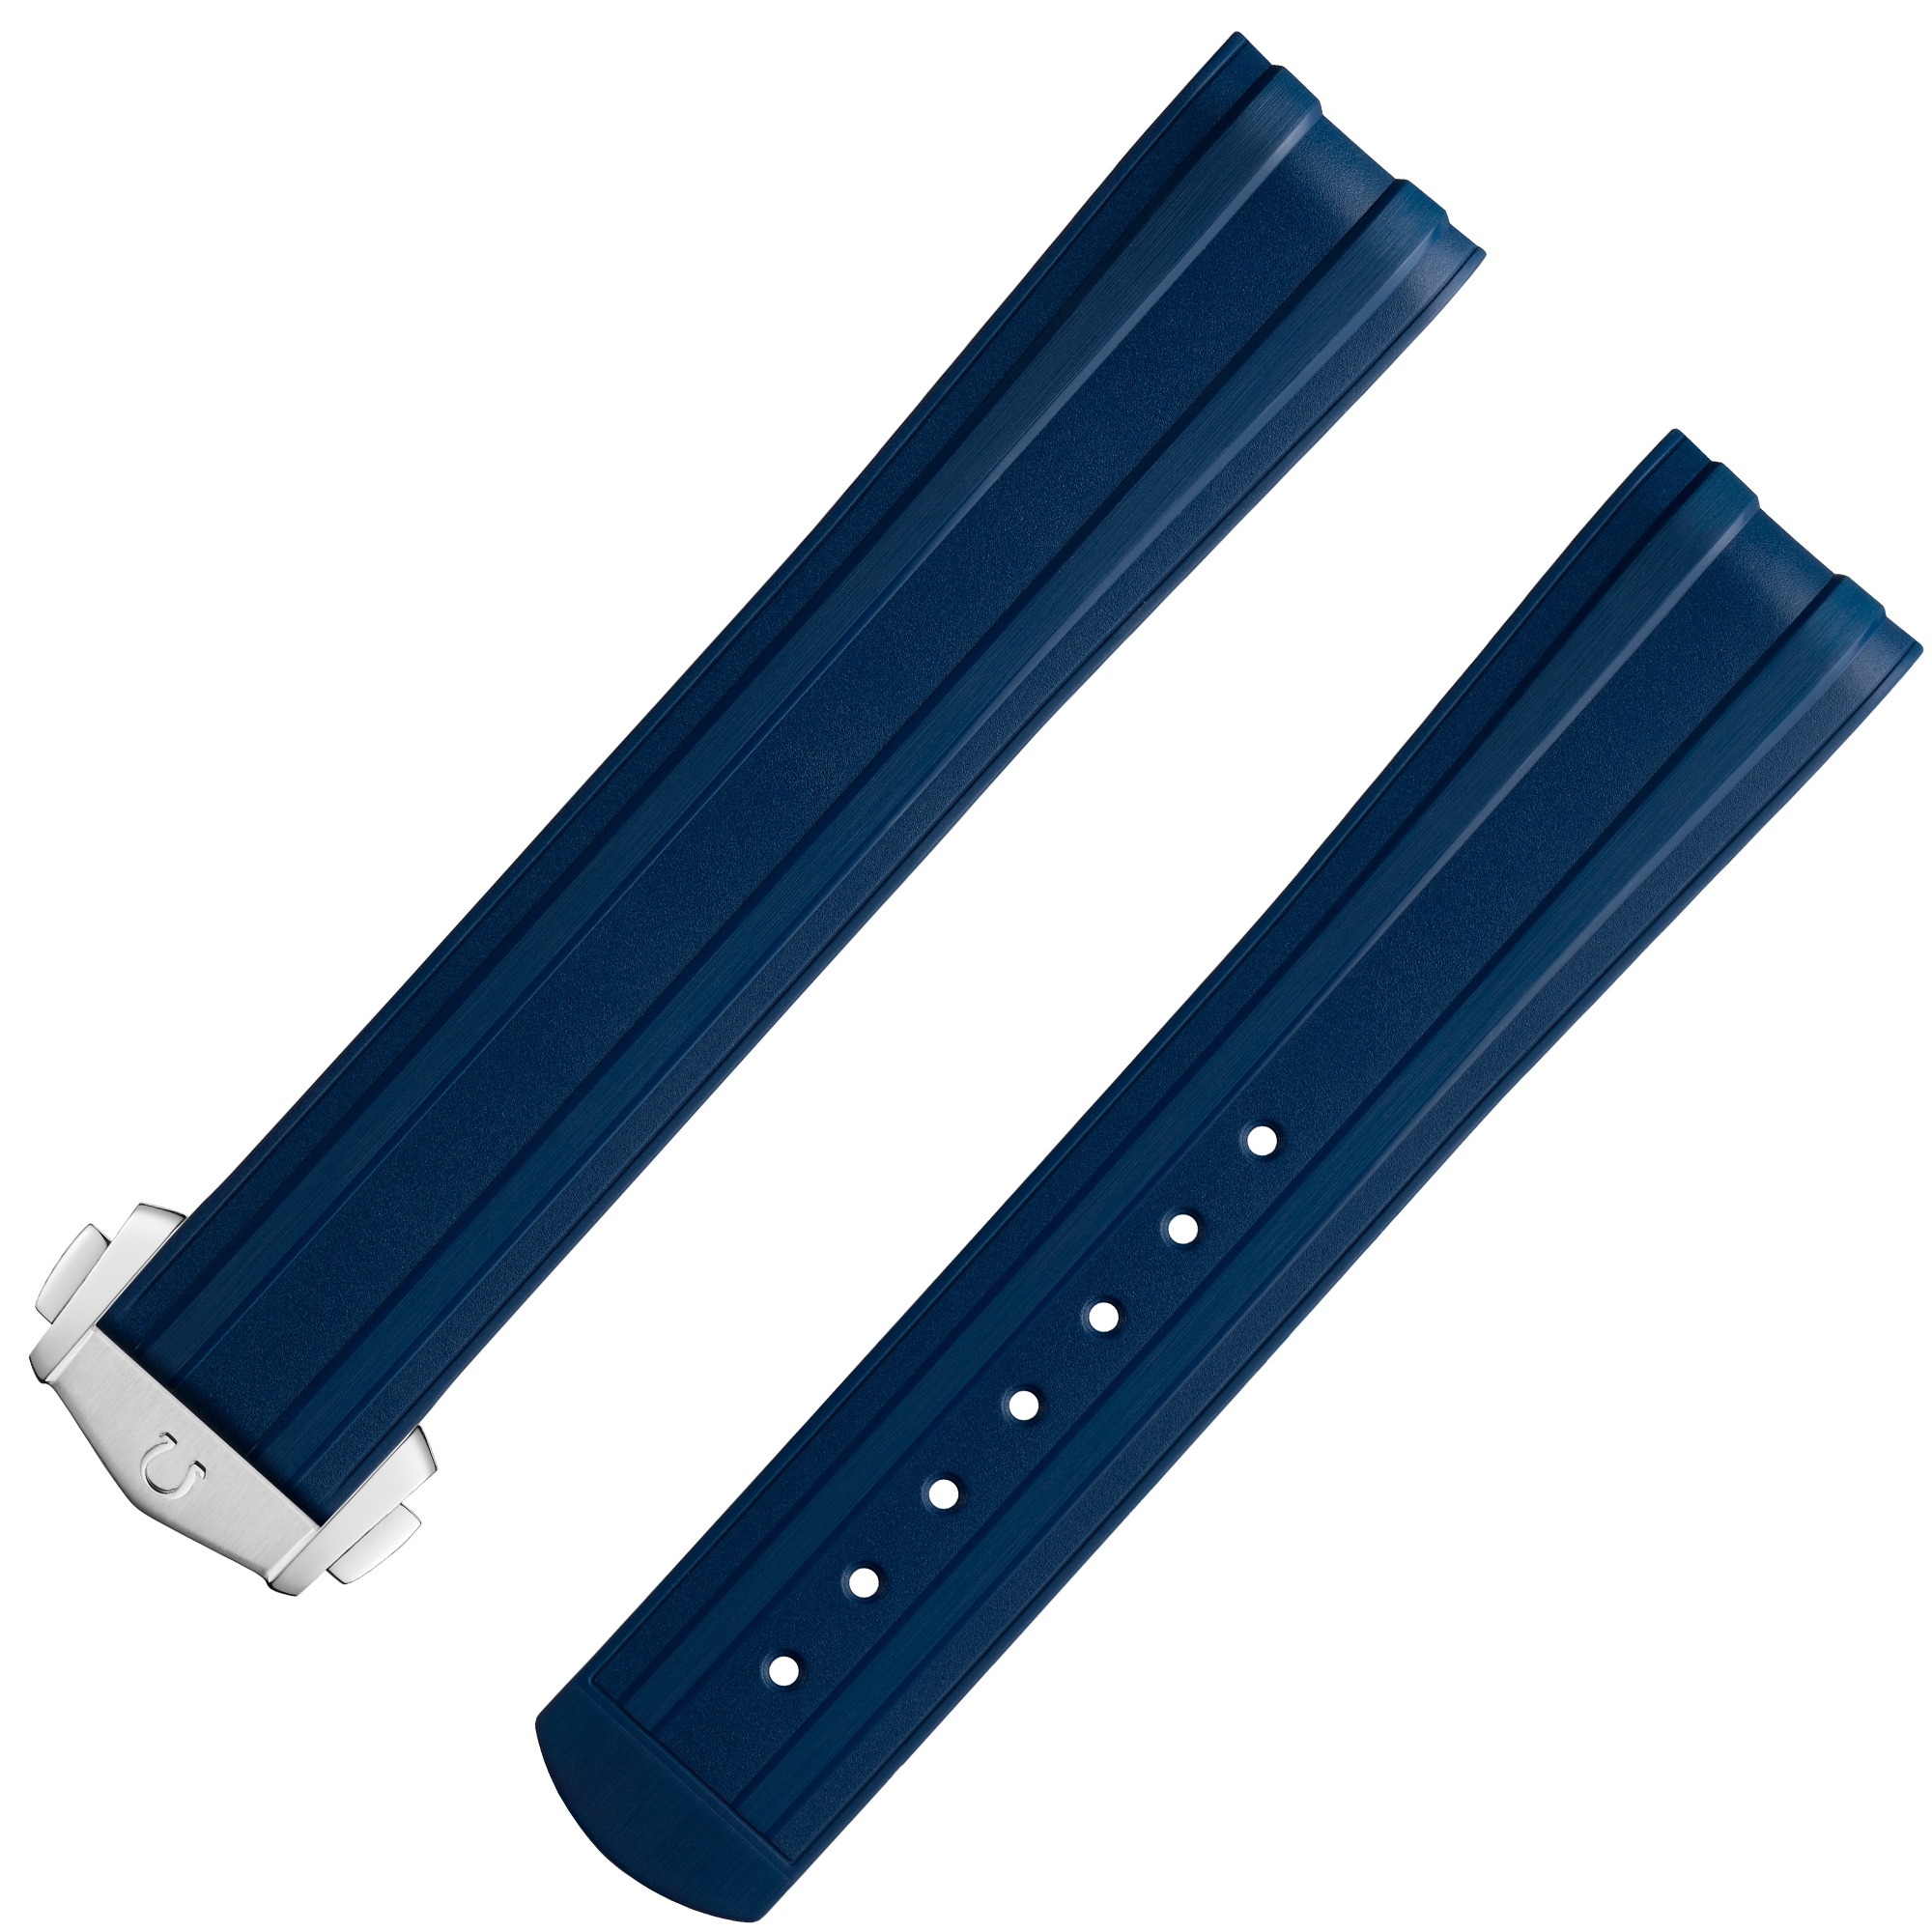 Two-piece strap - Seamaster Diver 300M blue rubber strap with foldover clasp - 032CVZ015753W